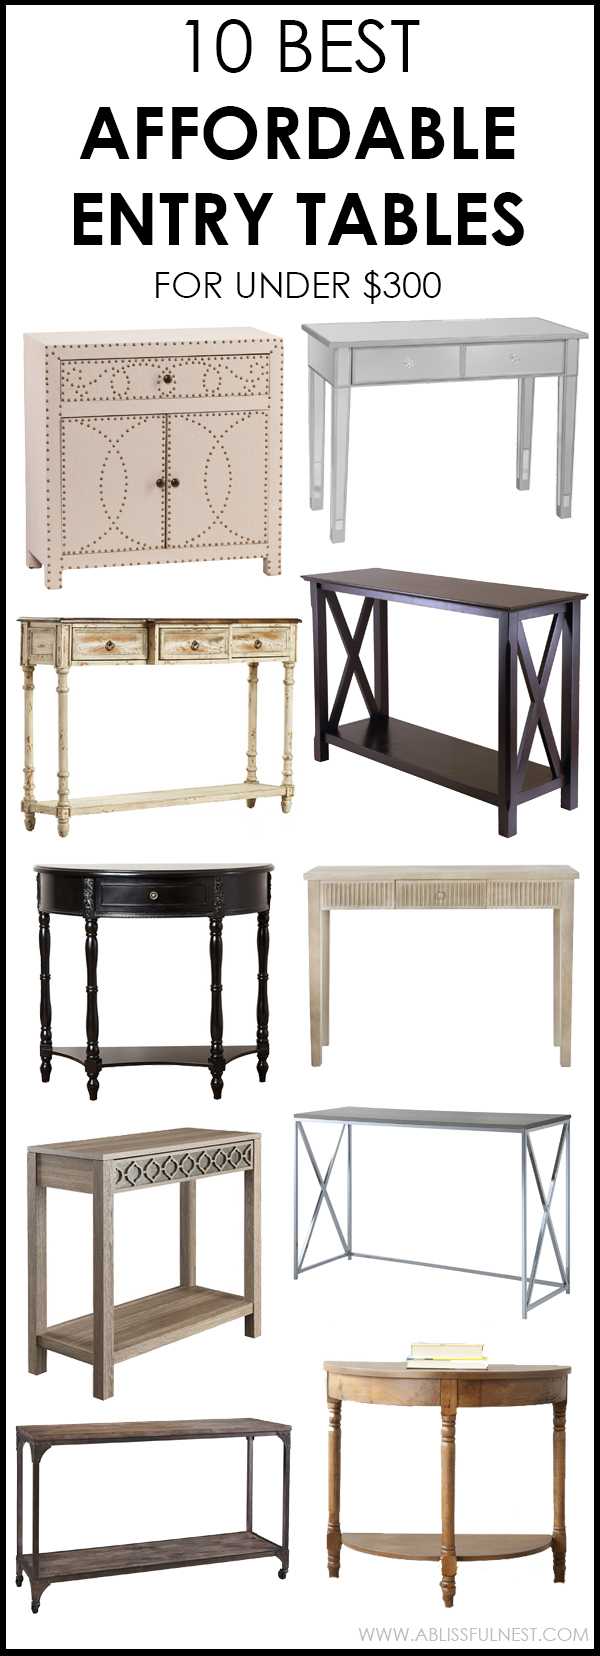 Love a classic style with a modern twist, then these are the perfect and most affordable entry tables for you! 10 most affordable entry tables on A Blissful Nest.